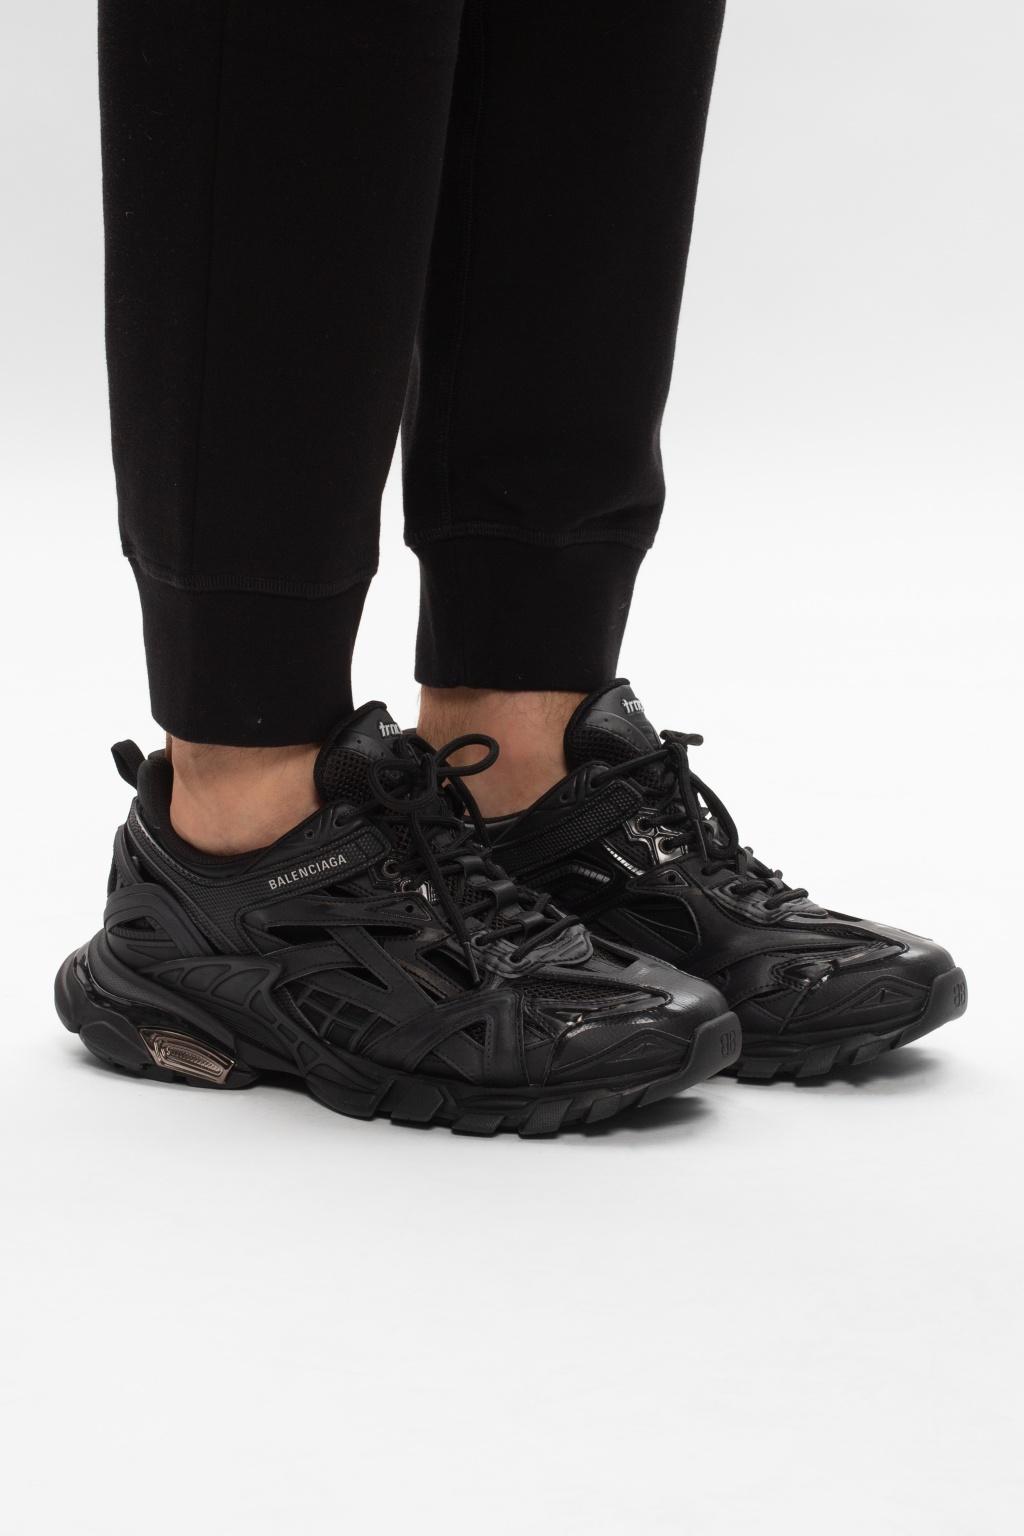 Balenciaga Track.2 Open Sneakers in Black for Men - Save 19% - Lyst